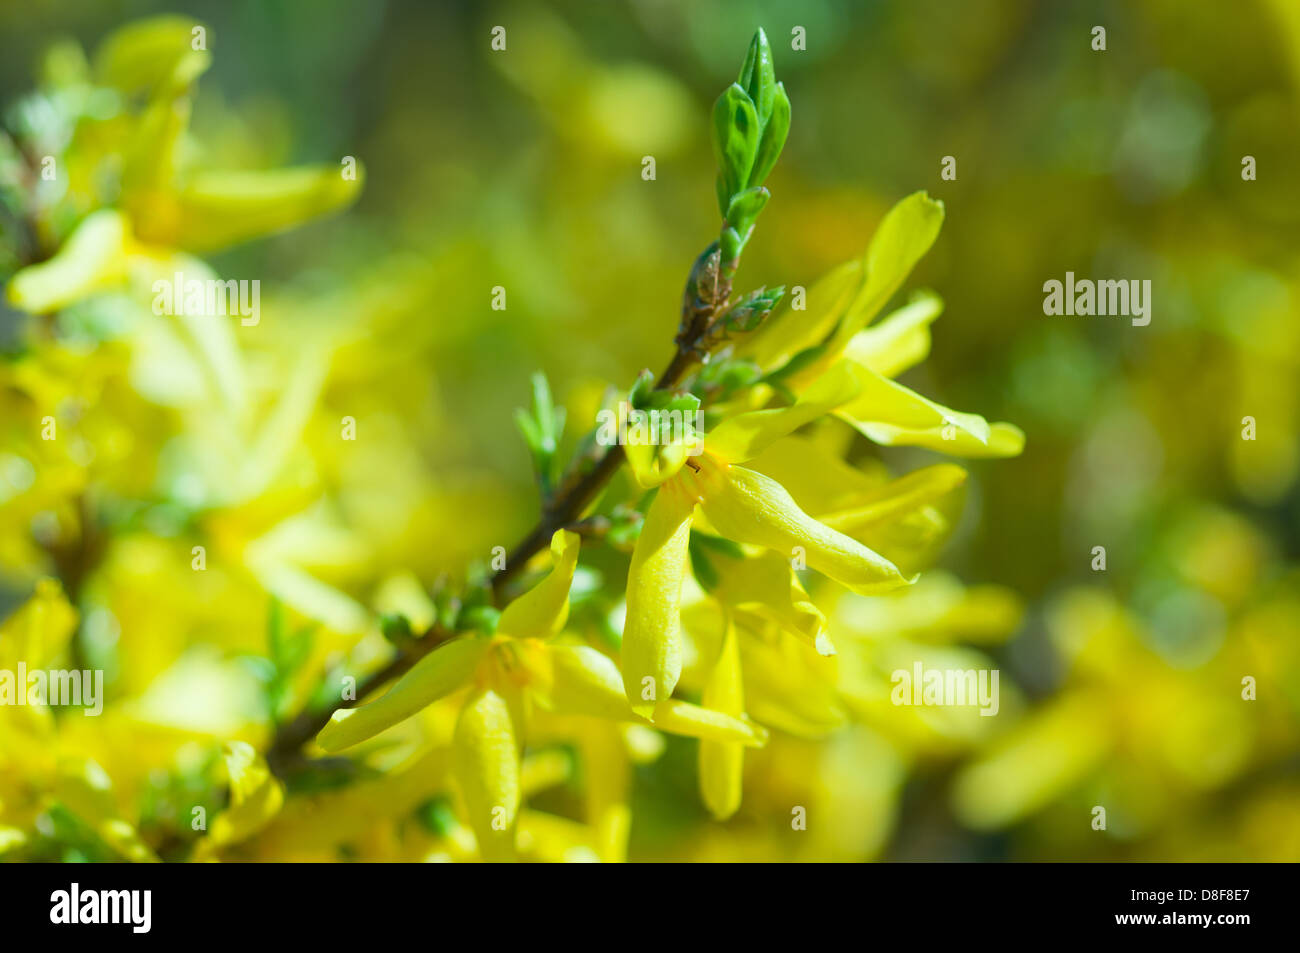 Forsythia twig with yellow flowers and green leaf. Stock Photo